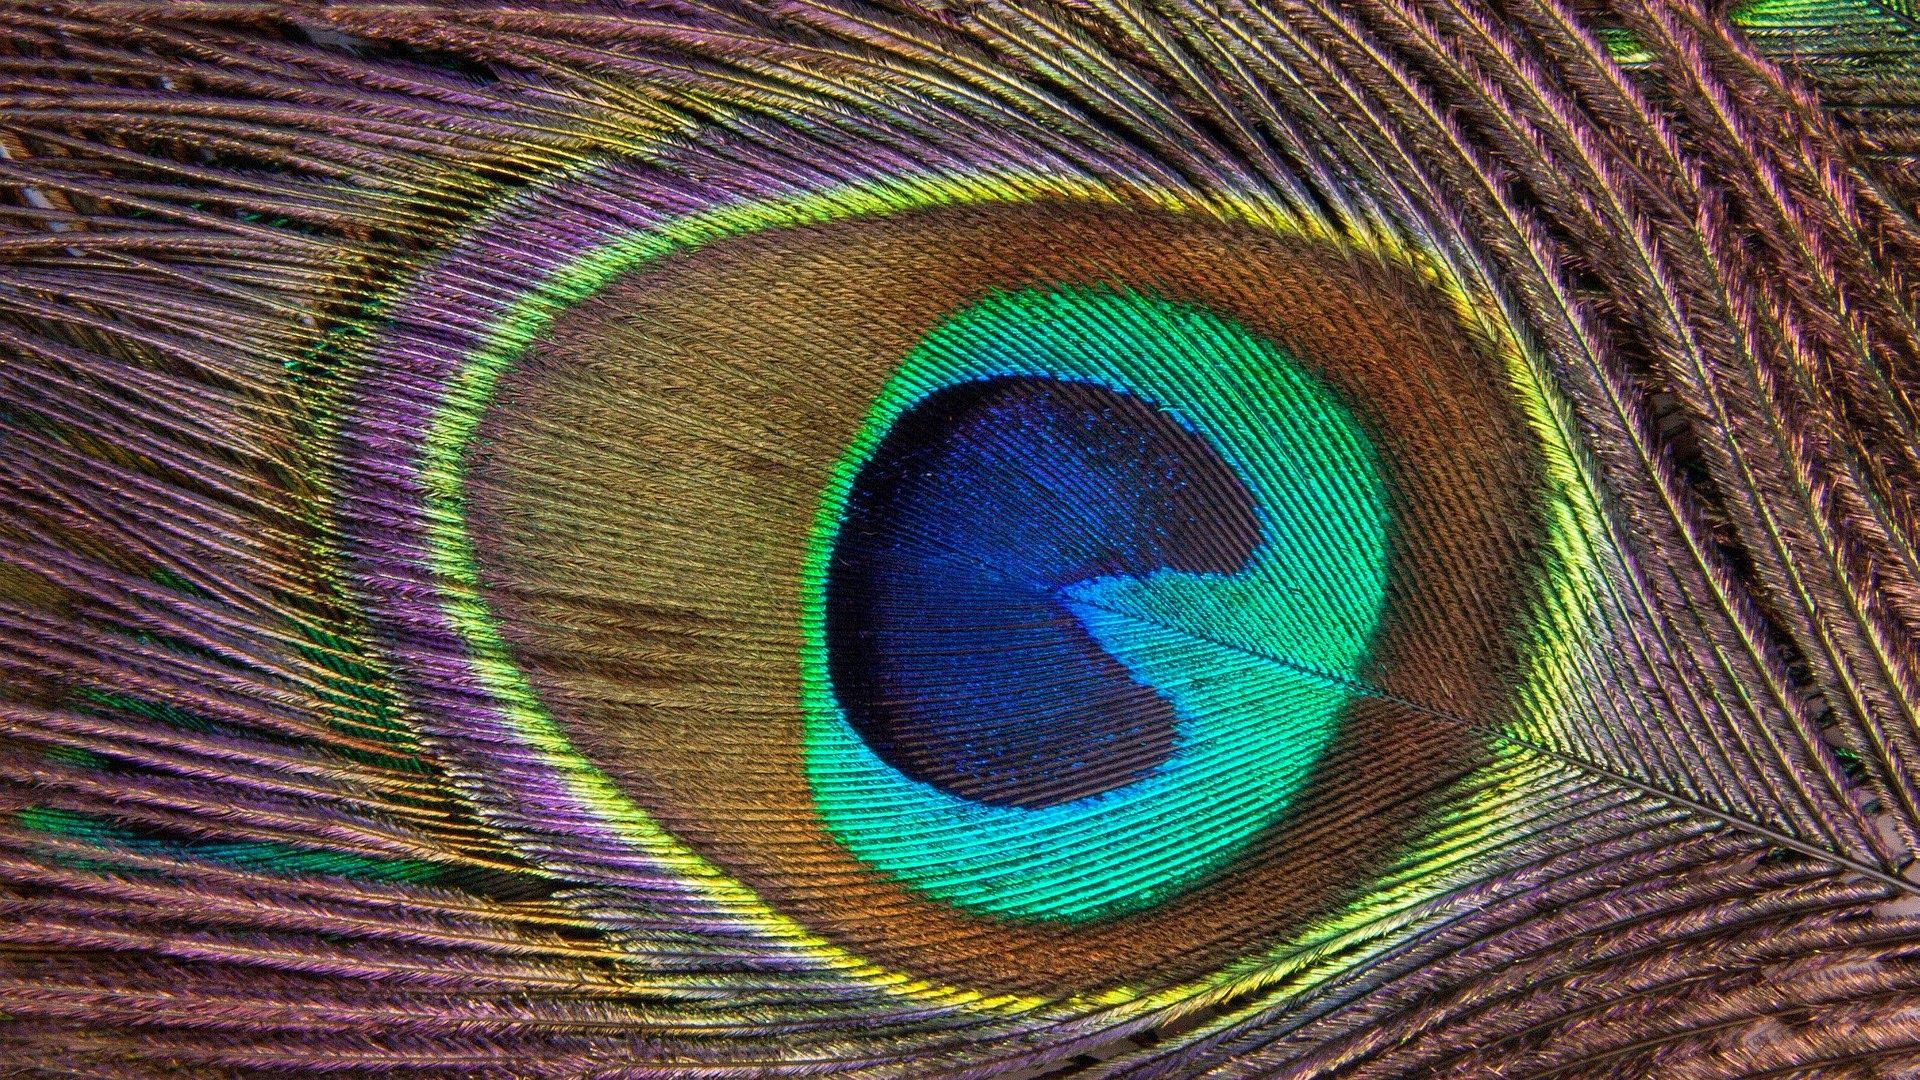 1920x1080 Peacock Feather High Quality Hd Wallpaper Mor Pankh 1920x1080 Download Hd Wallpaper